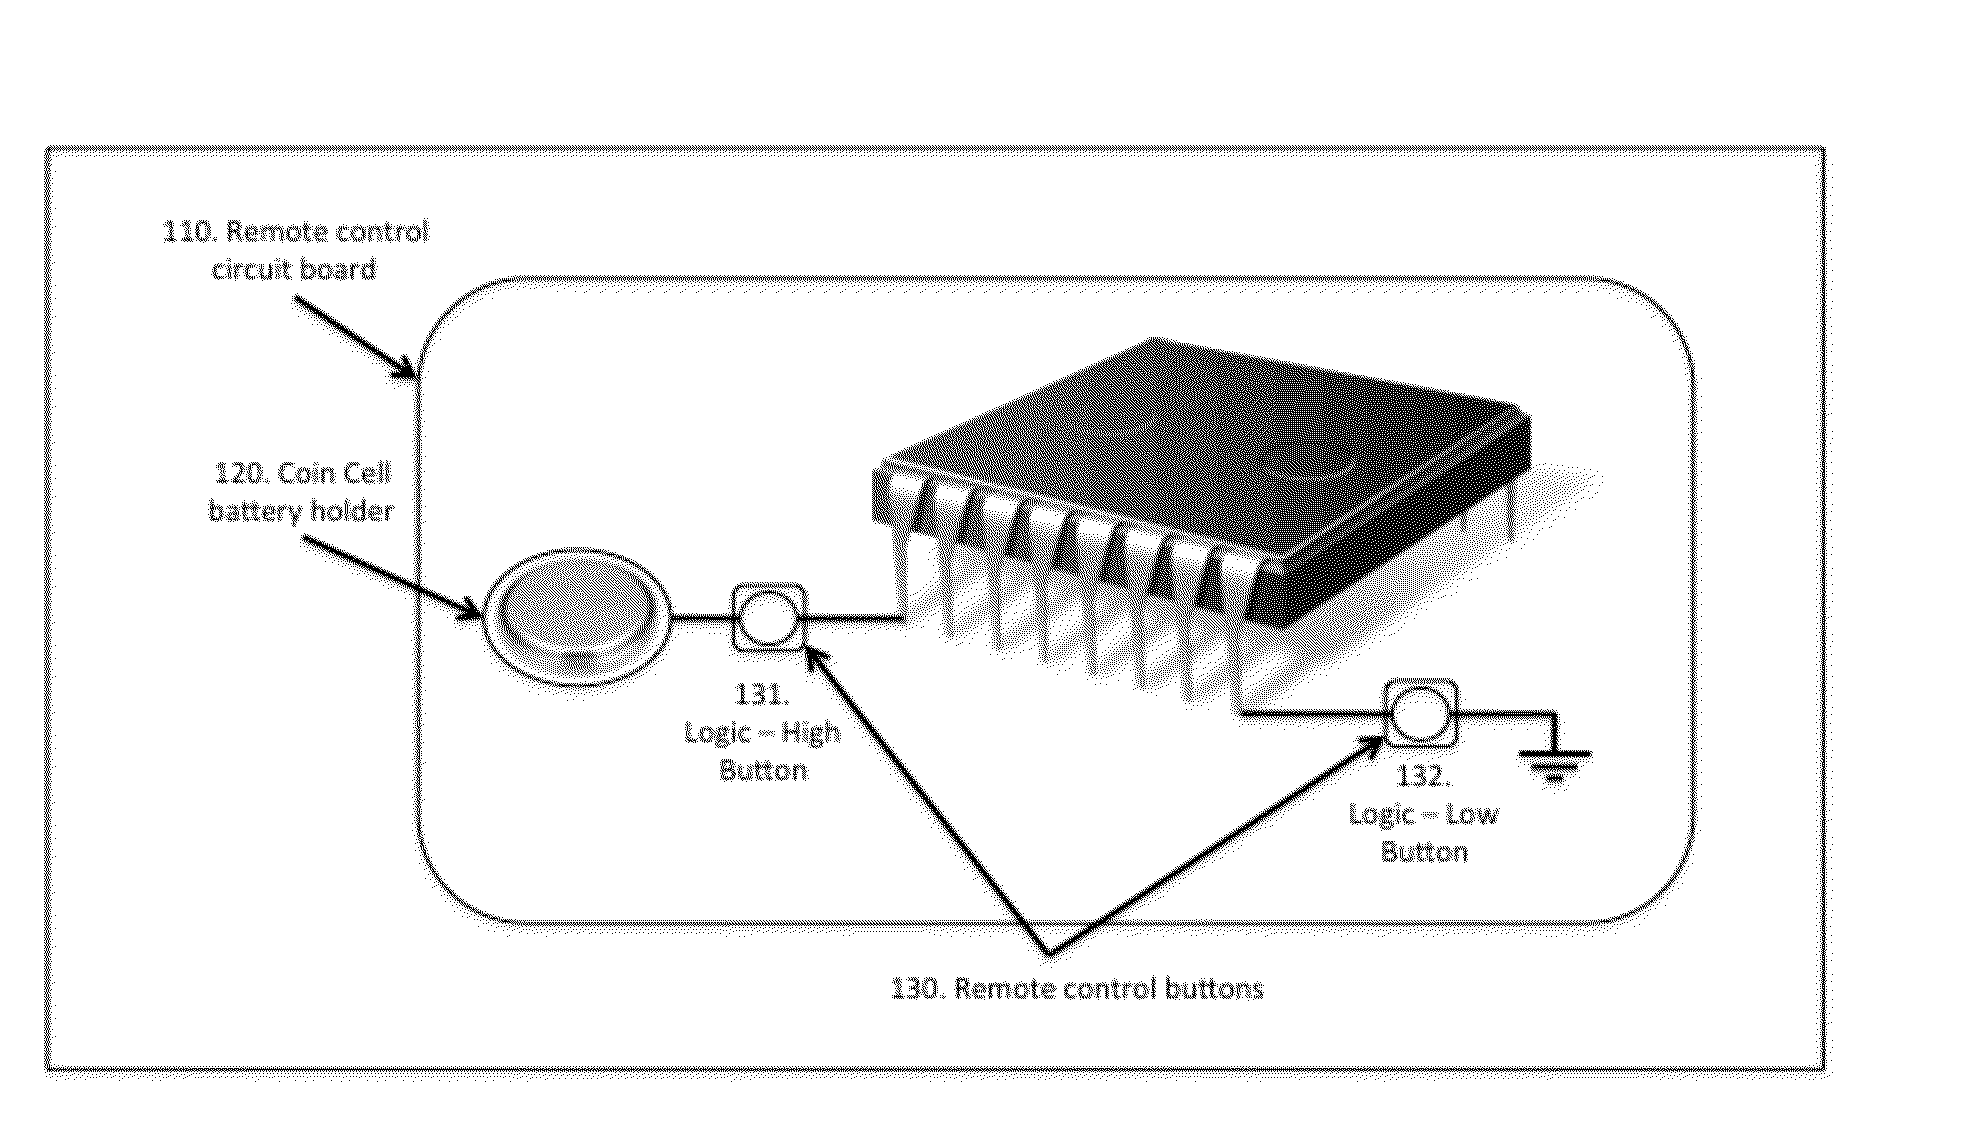 METHOD, SYSTEM, and COMPUTER-READABLE MEDIUM RELATING TO INTERNET of THINGS-ENABLED REMOTE CONTROLS